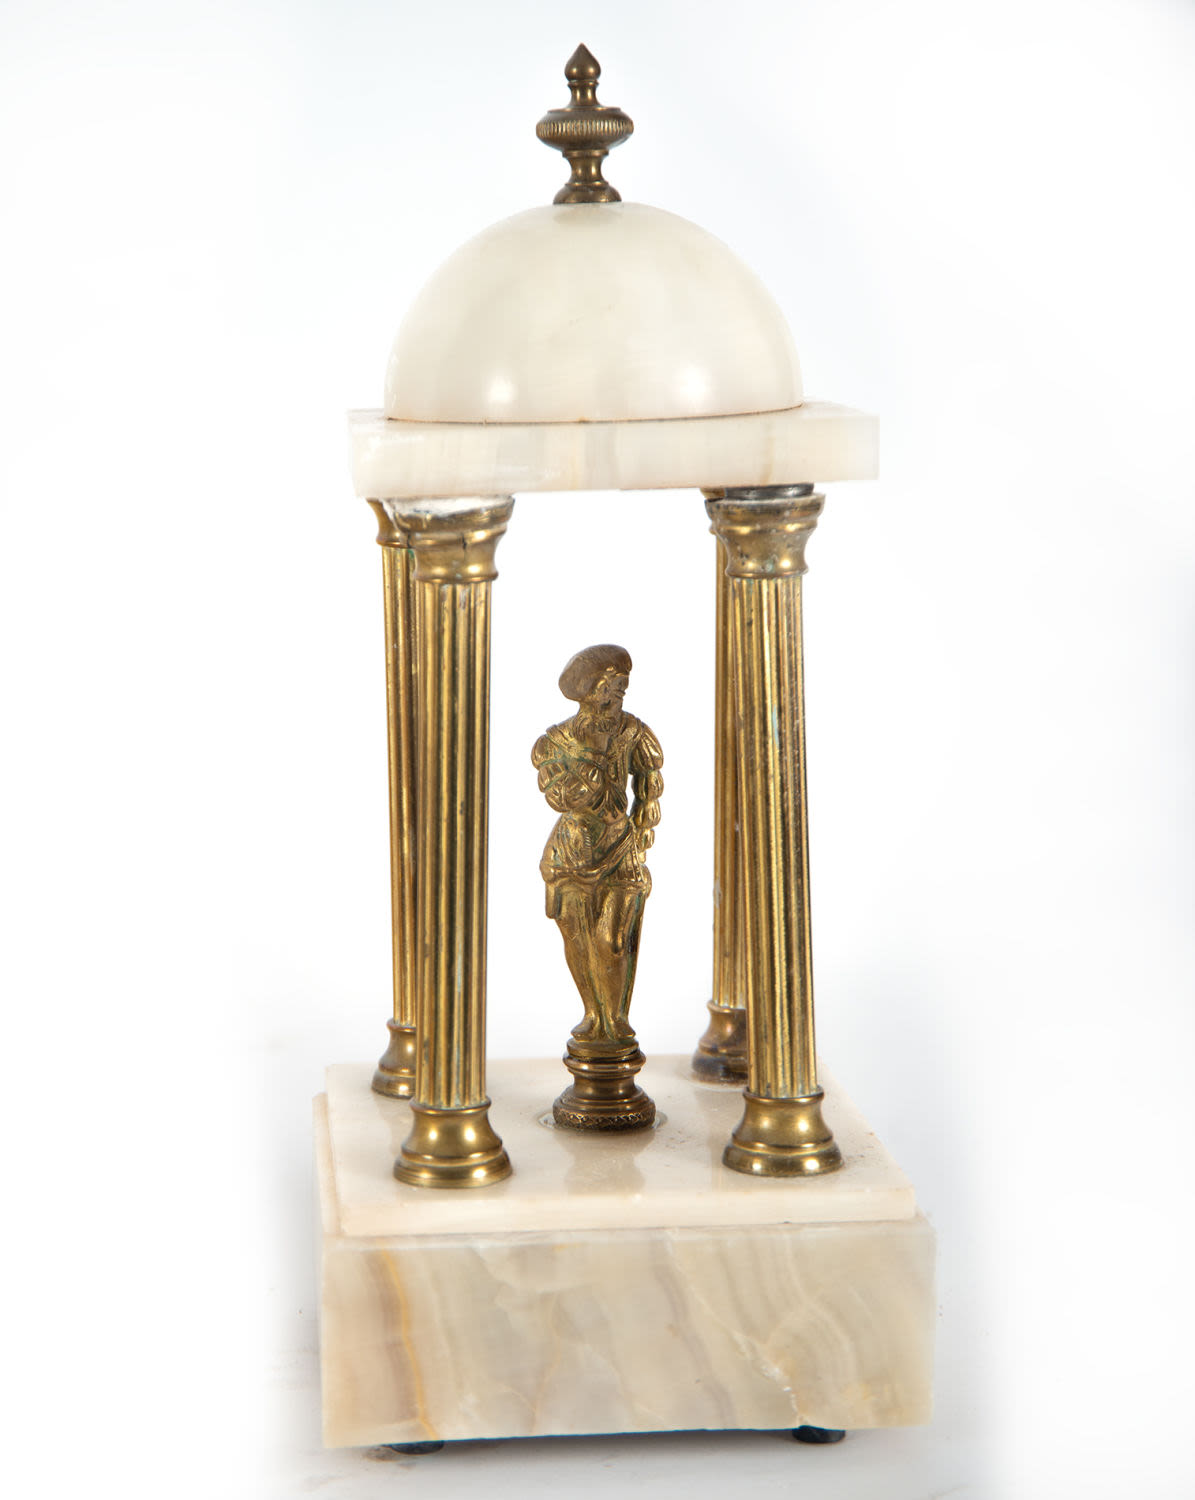 Alabaster garniture, circa 1890 - 1900, with a pair of temples and columns in gilt bronze - Image 4 of 7